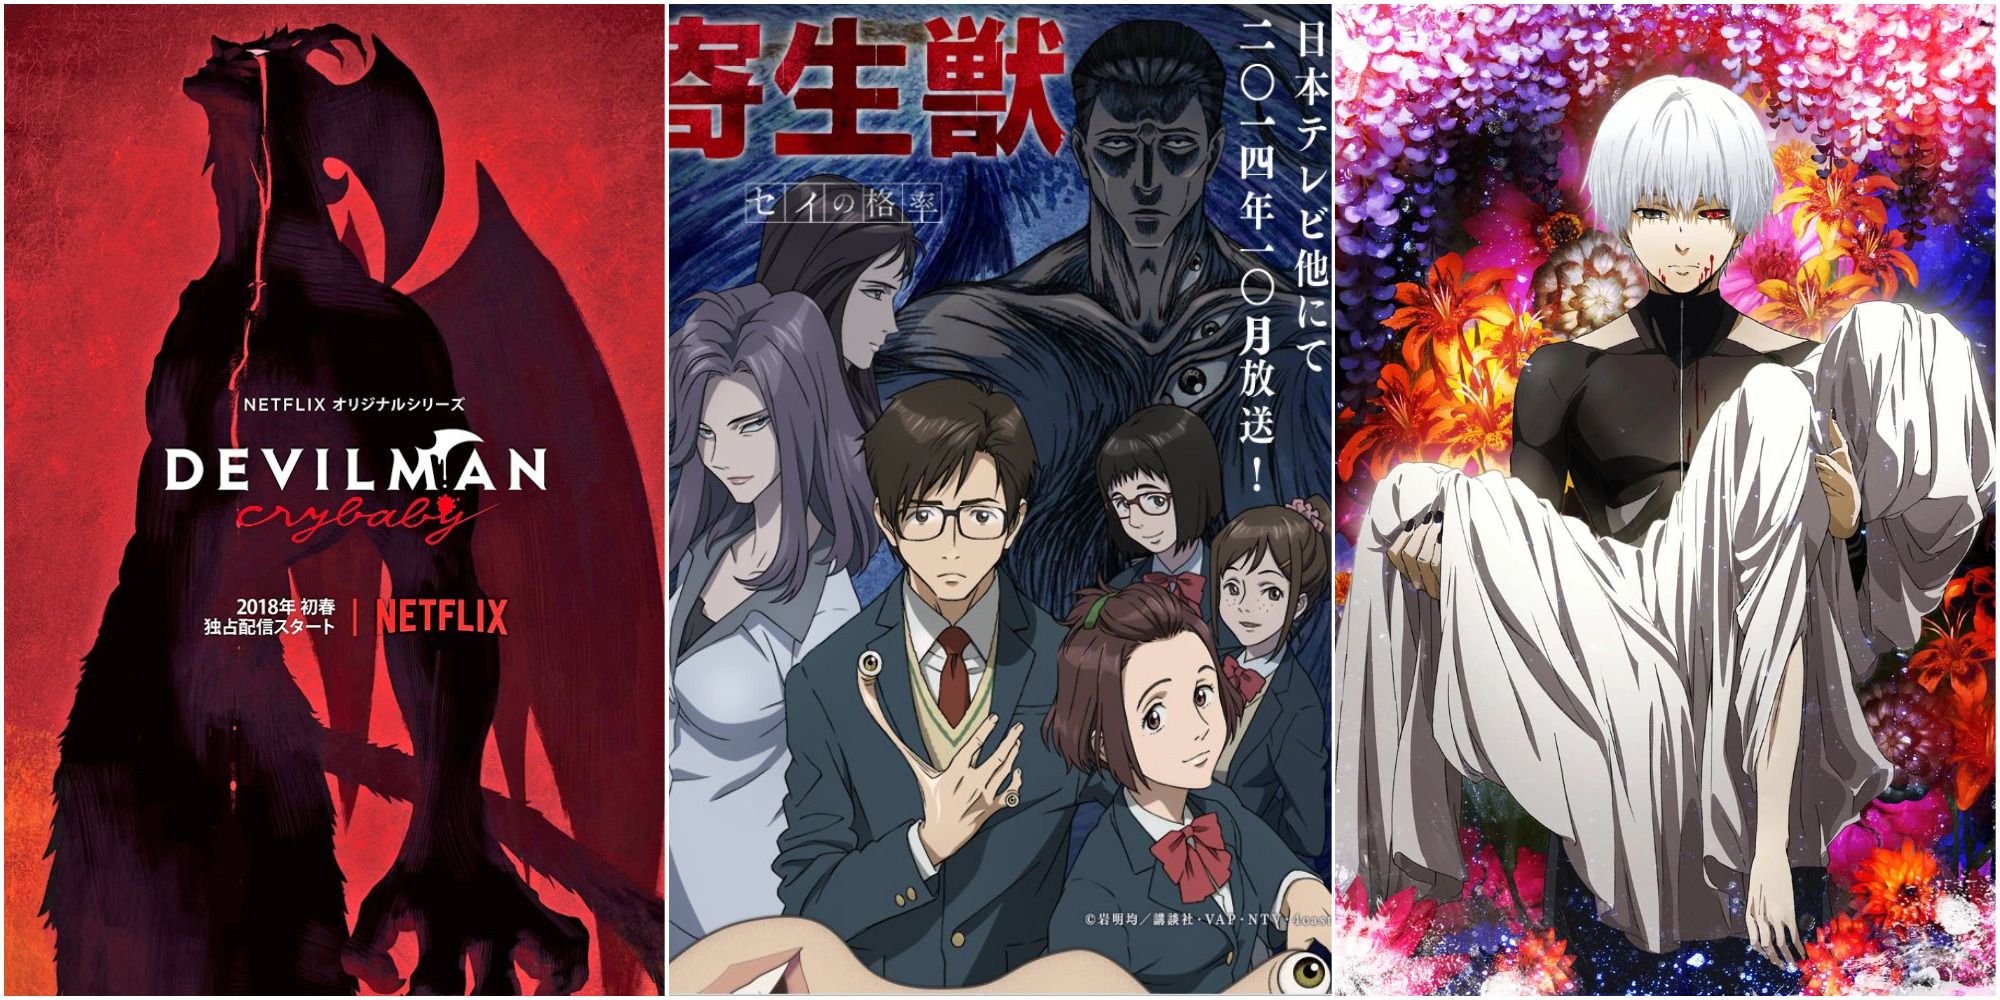 The 10 Best Horror Anime Of The 2010s, Ranked According To MyAnimeList